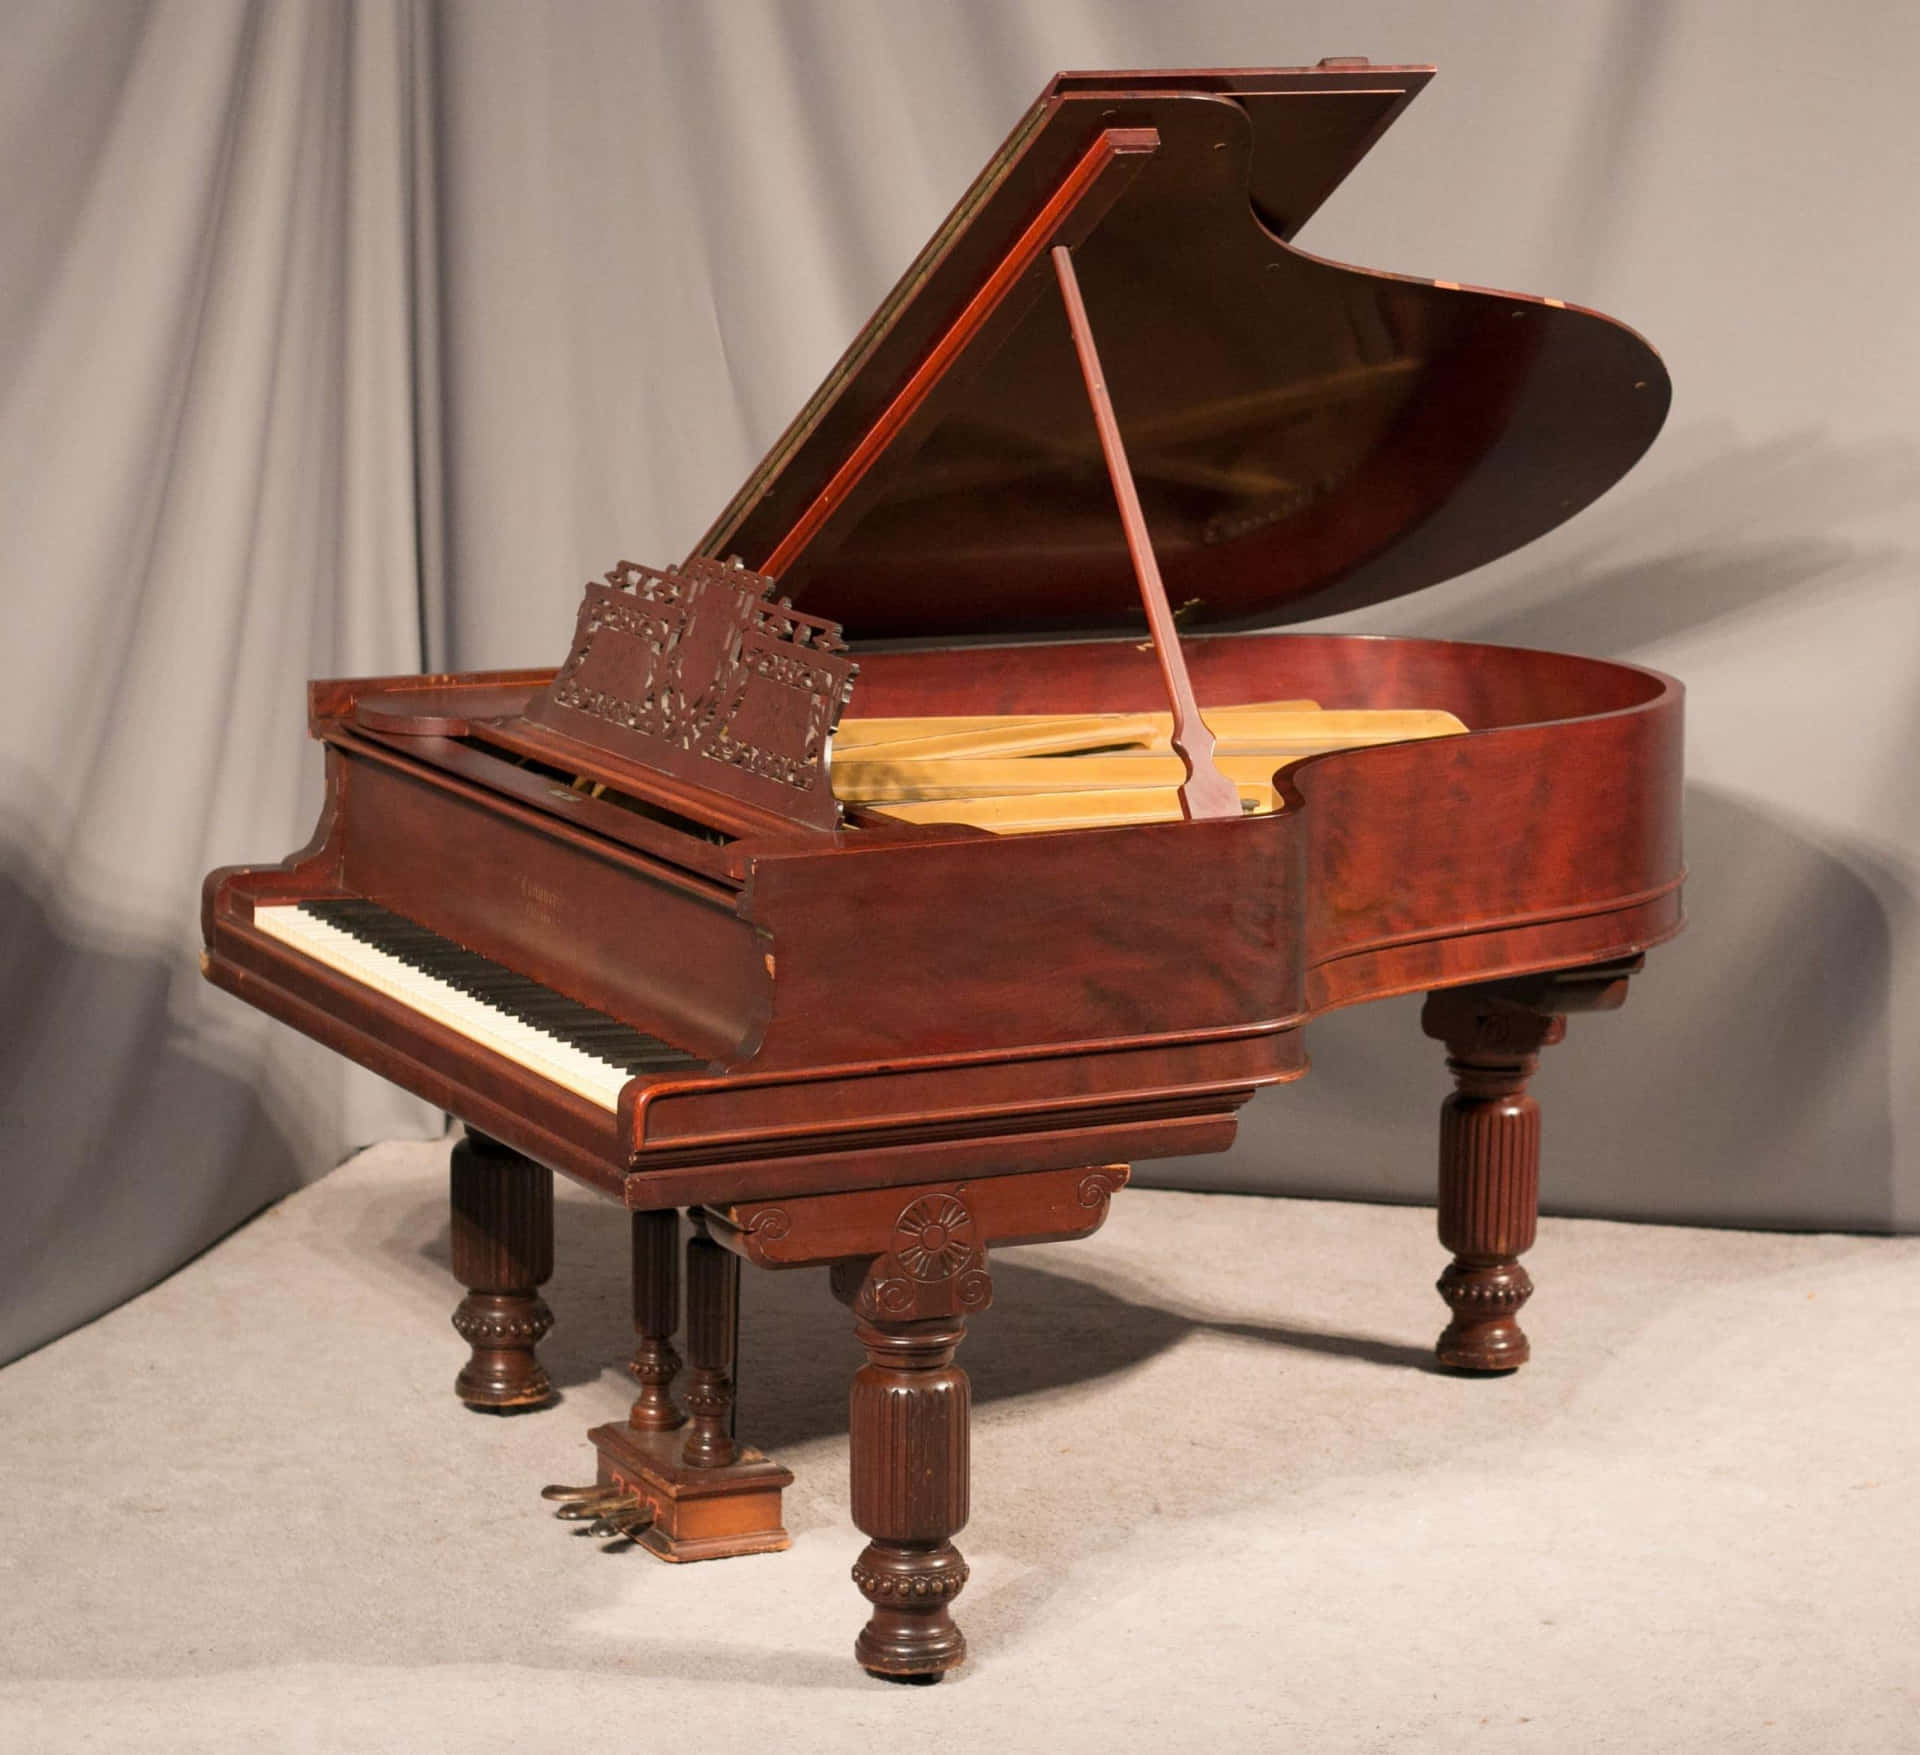 A Grand Piano With A Wooden Frame And A Wooden Top